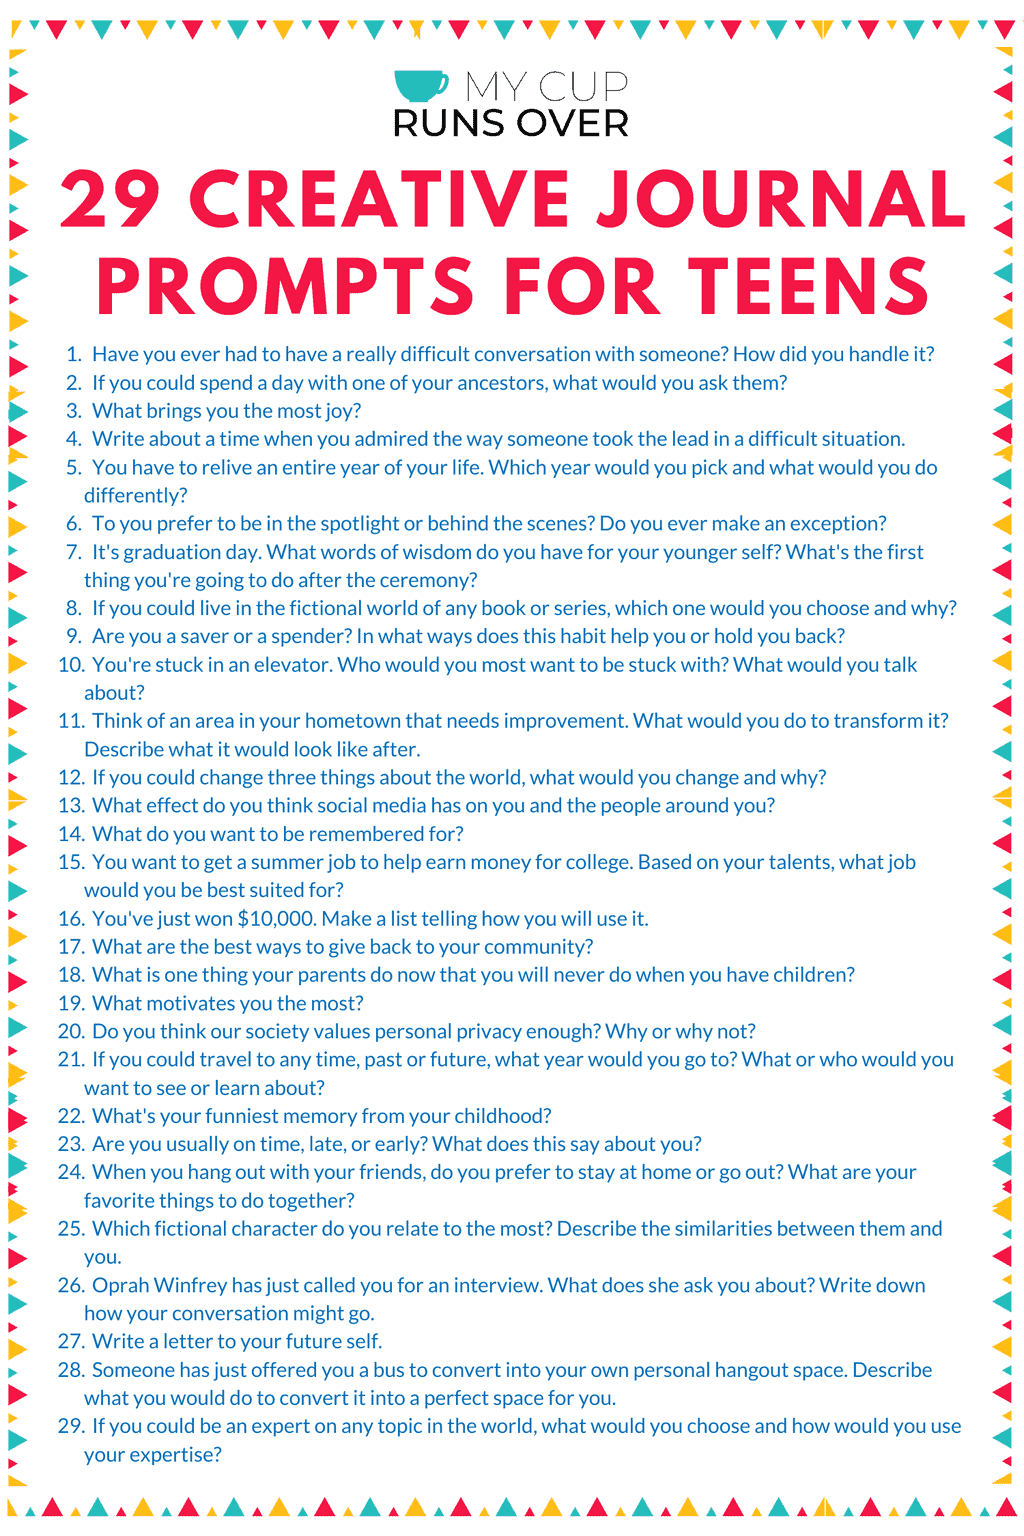 29 Creative Journal Prompts for Teens: Fun Prompts to Get ...